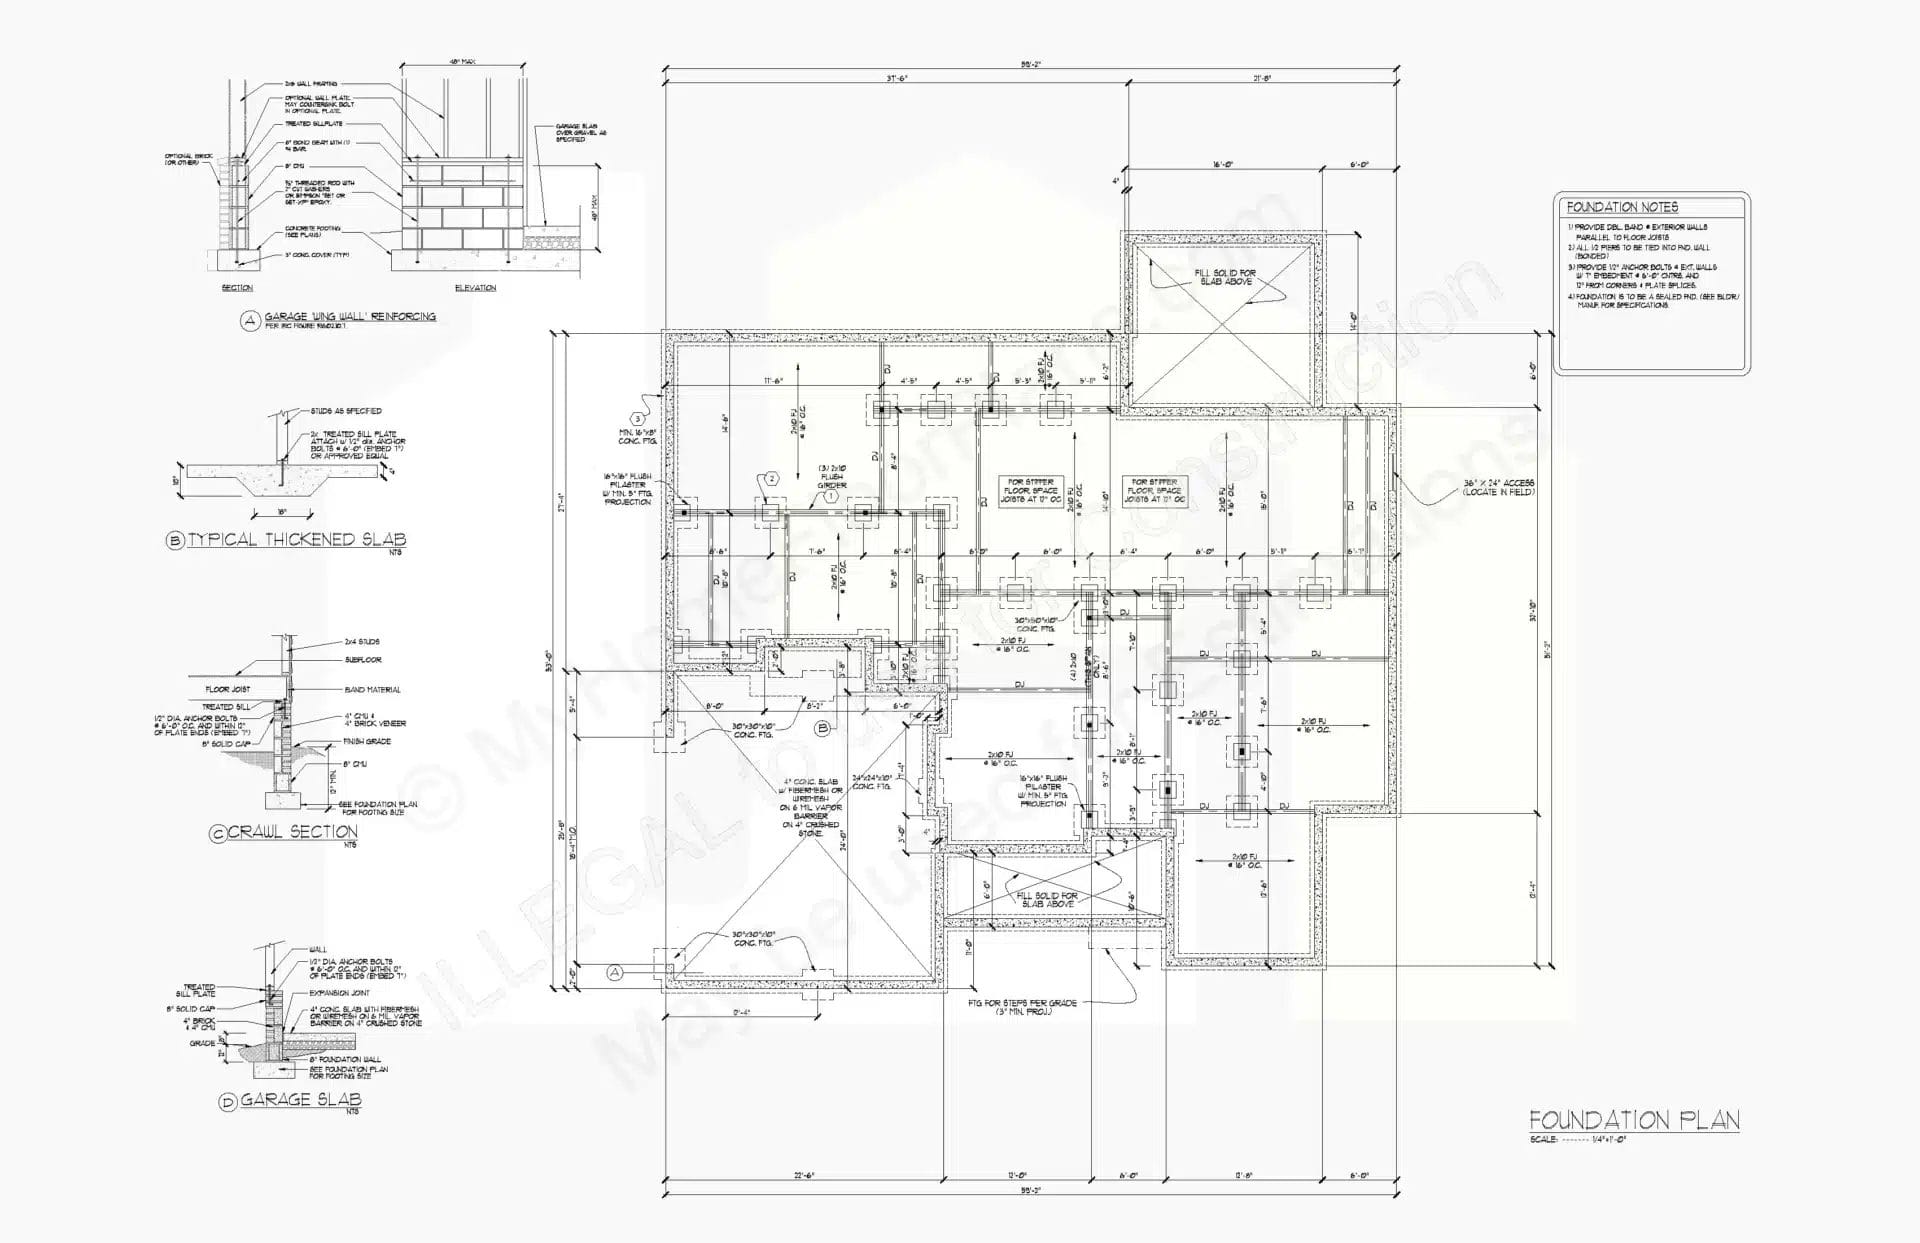 Detailed architectural foundation plan showing a floor layout with labeled rooms, dimensions, and construction notes. Annotations and sectional drawings are included around the 13-1721.